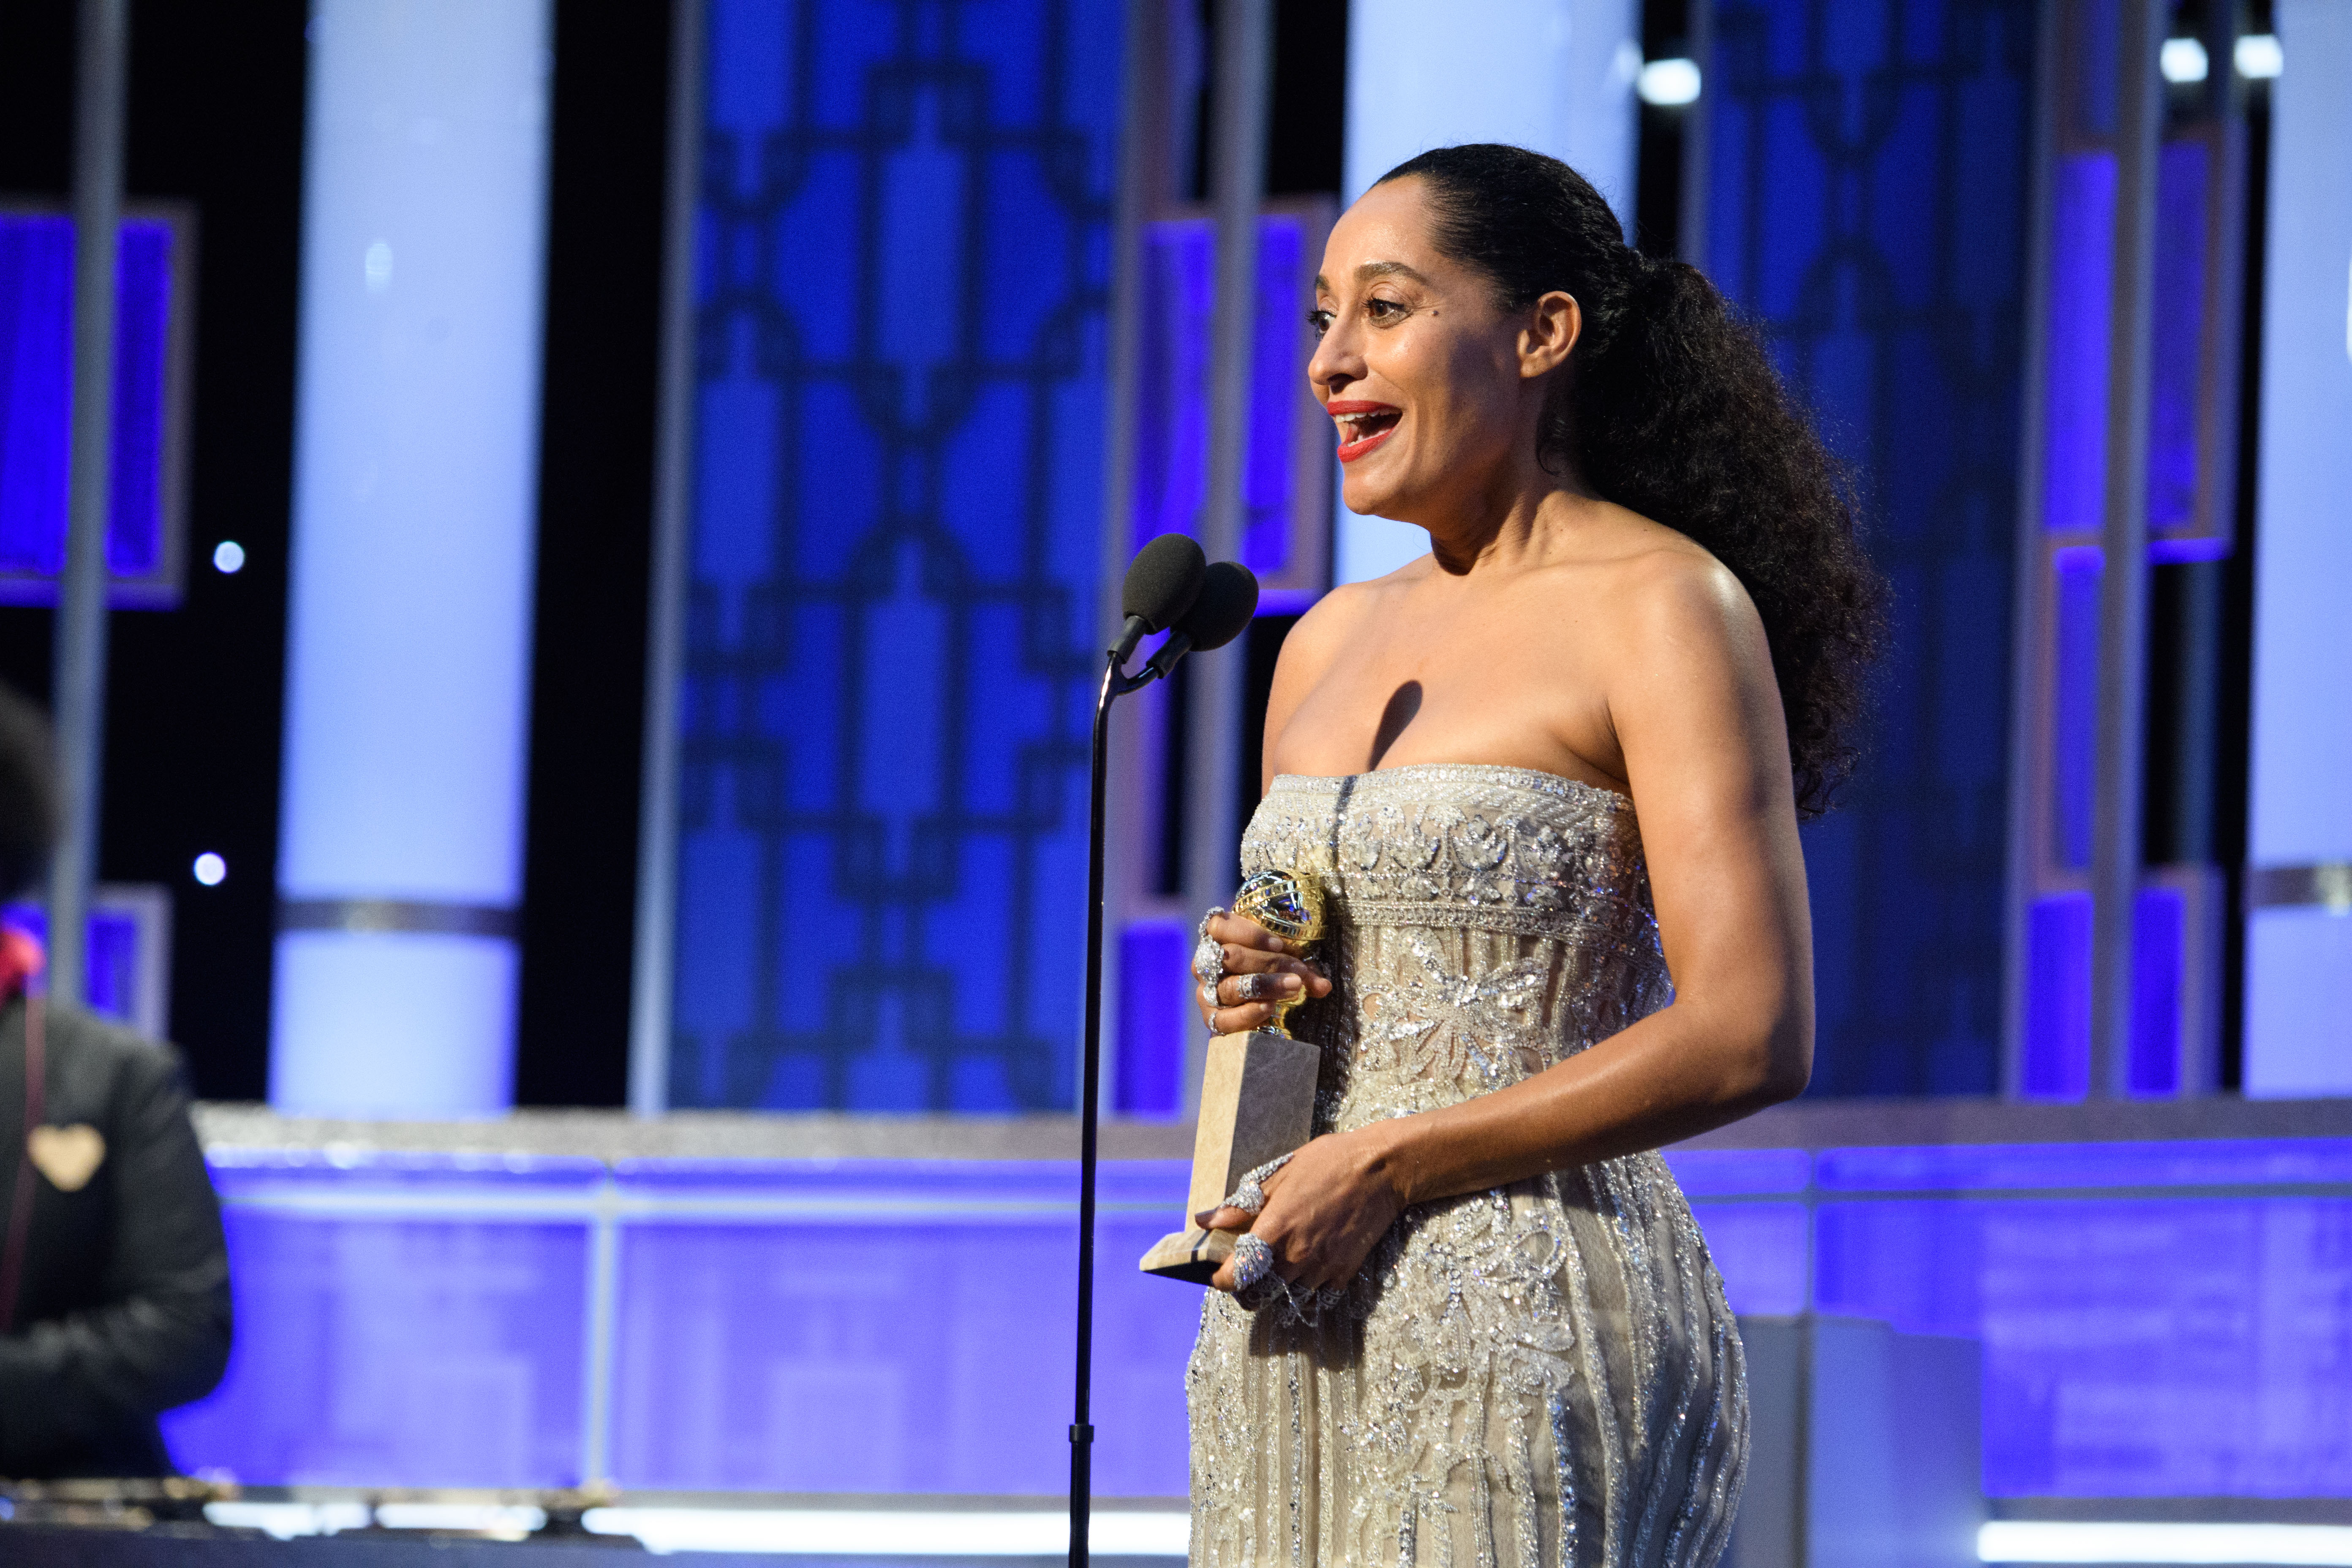 Tracee Ellis Ross accepts the Golden Globe Award for BEST PERFORMANCE BY AN ACTRESS IN A TELEVISION SERIES – COMEDY OR MUSICAL for her role in "Black-ish" at the 74th Annual Golden Globe Awards at the Beverly Hilton in Beverly Hills, CA on Sunday, January 8, 2017.